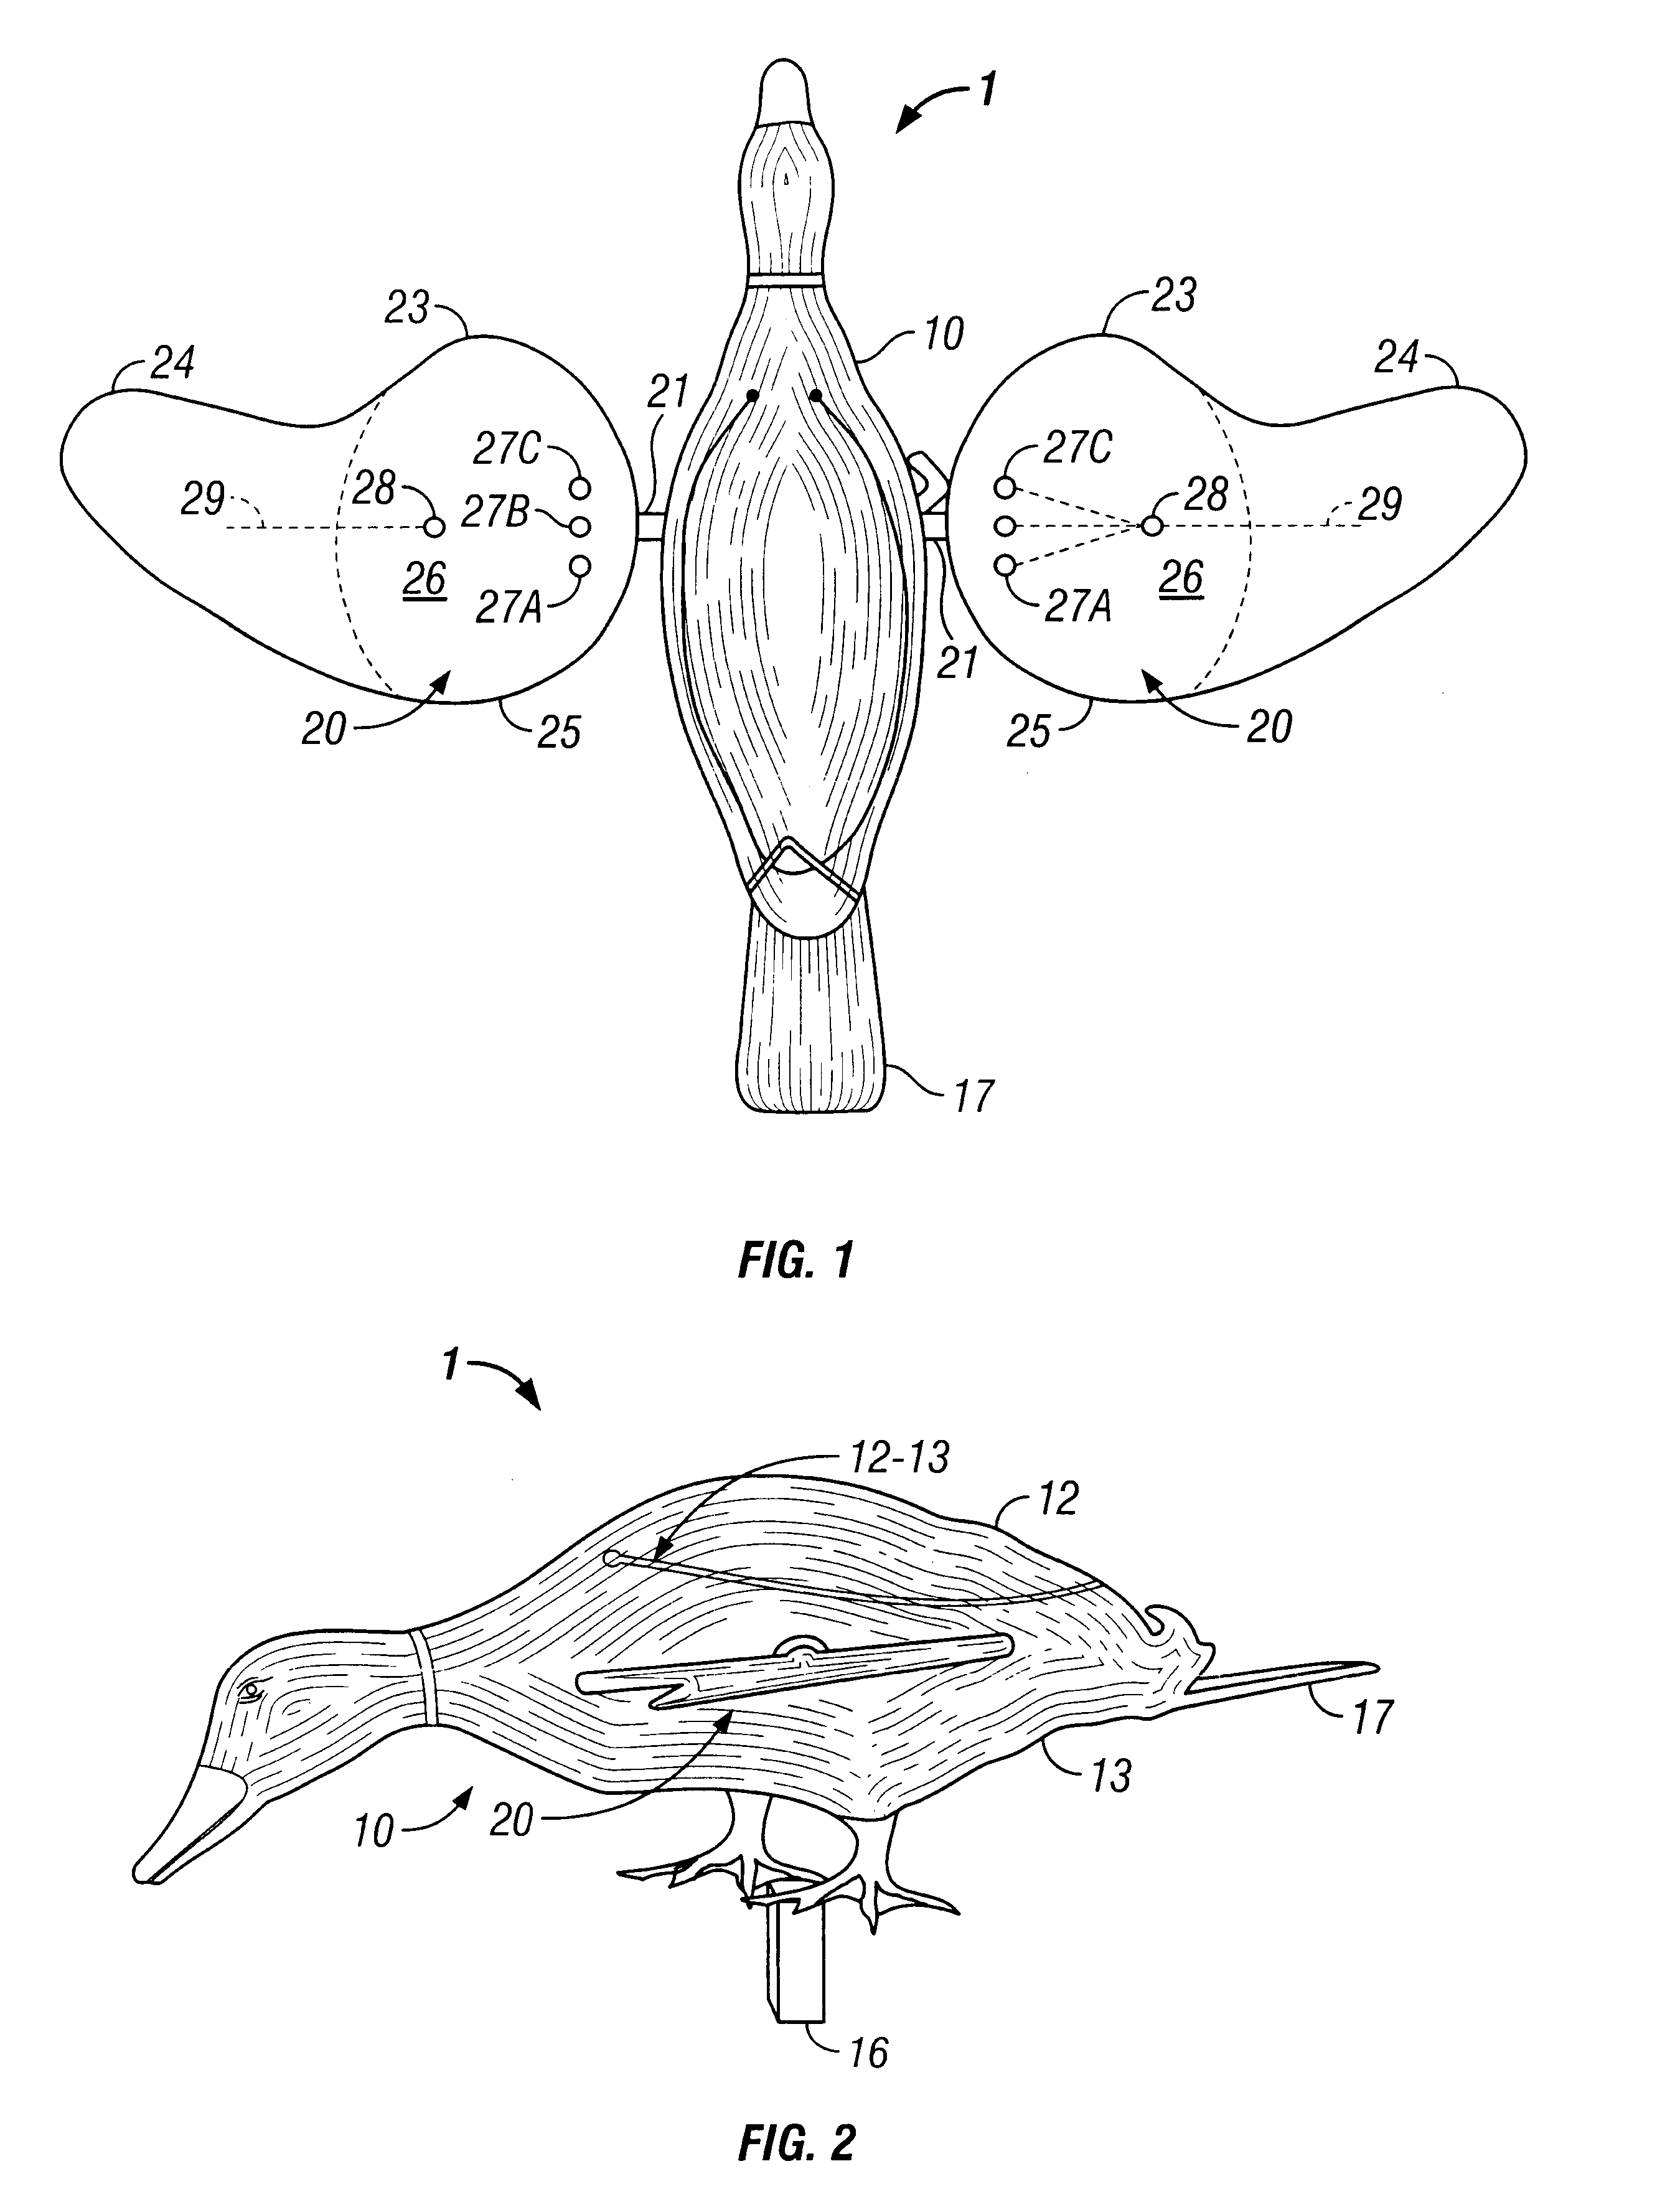 Game decoy with high-speed, rotating "strobe" wings and in-line motor drive